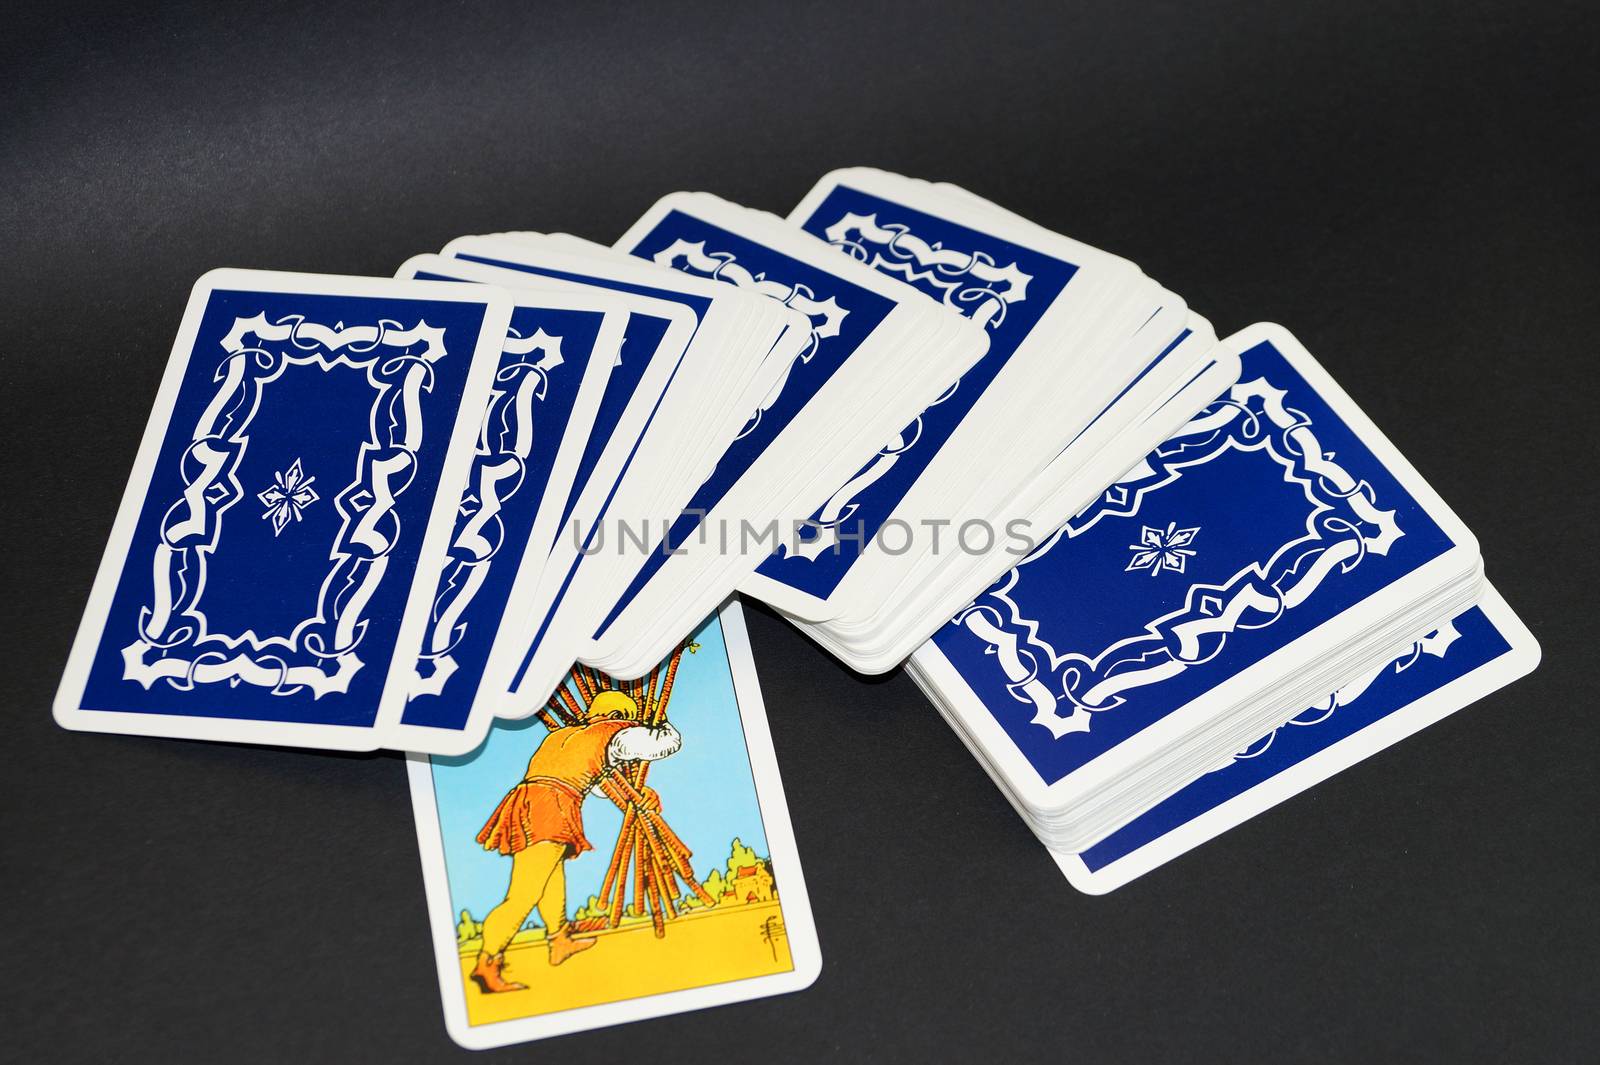 scattered deck of tarot cards with one card upside down on black background by Annado